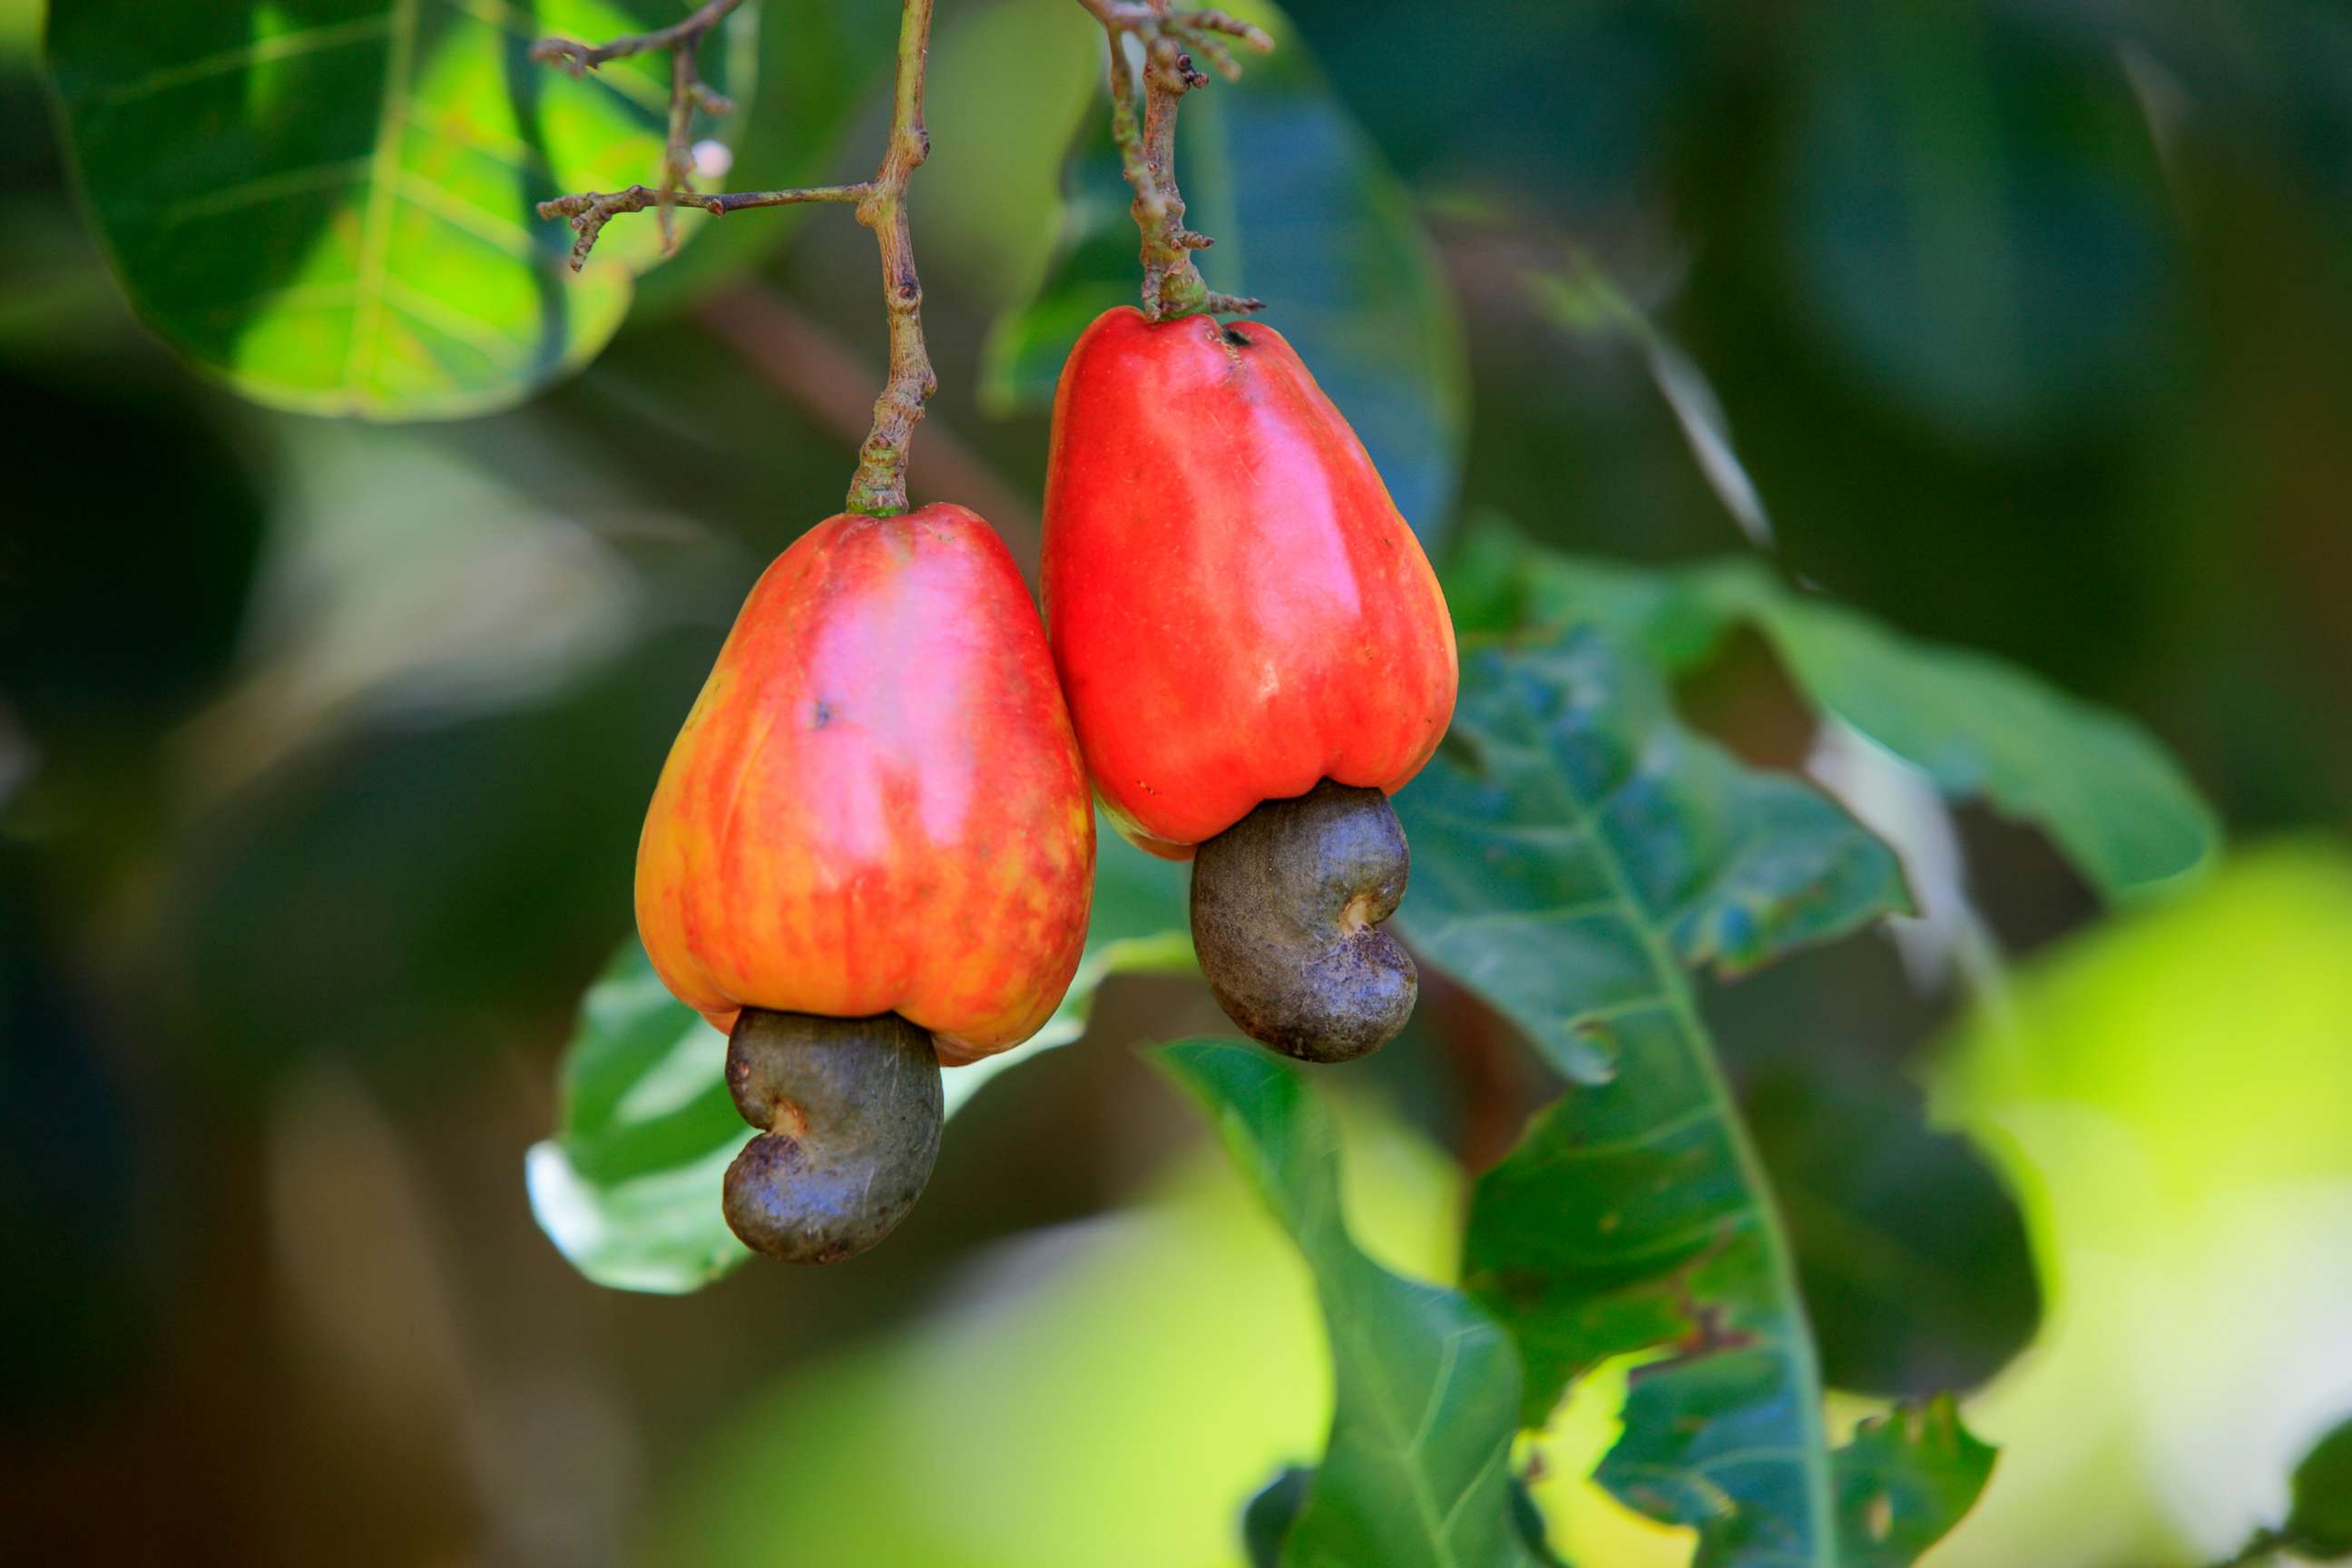 PHOTO: Cashew fruit hangs on tree in this stock photo.